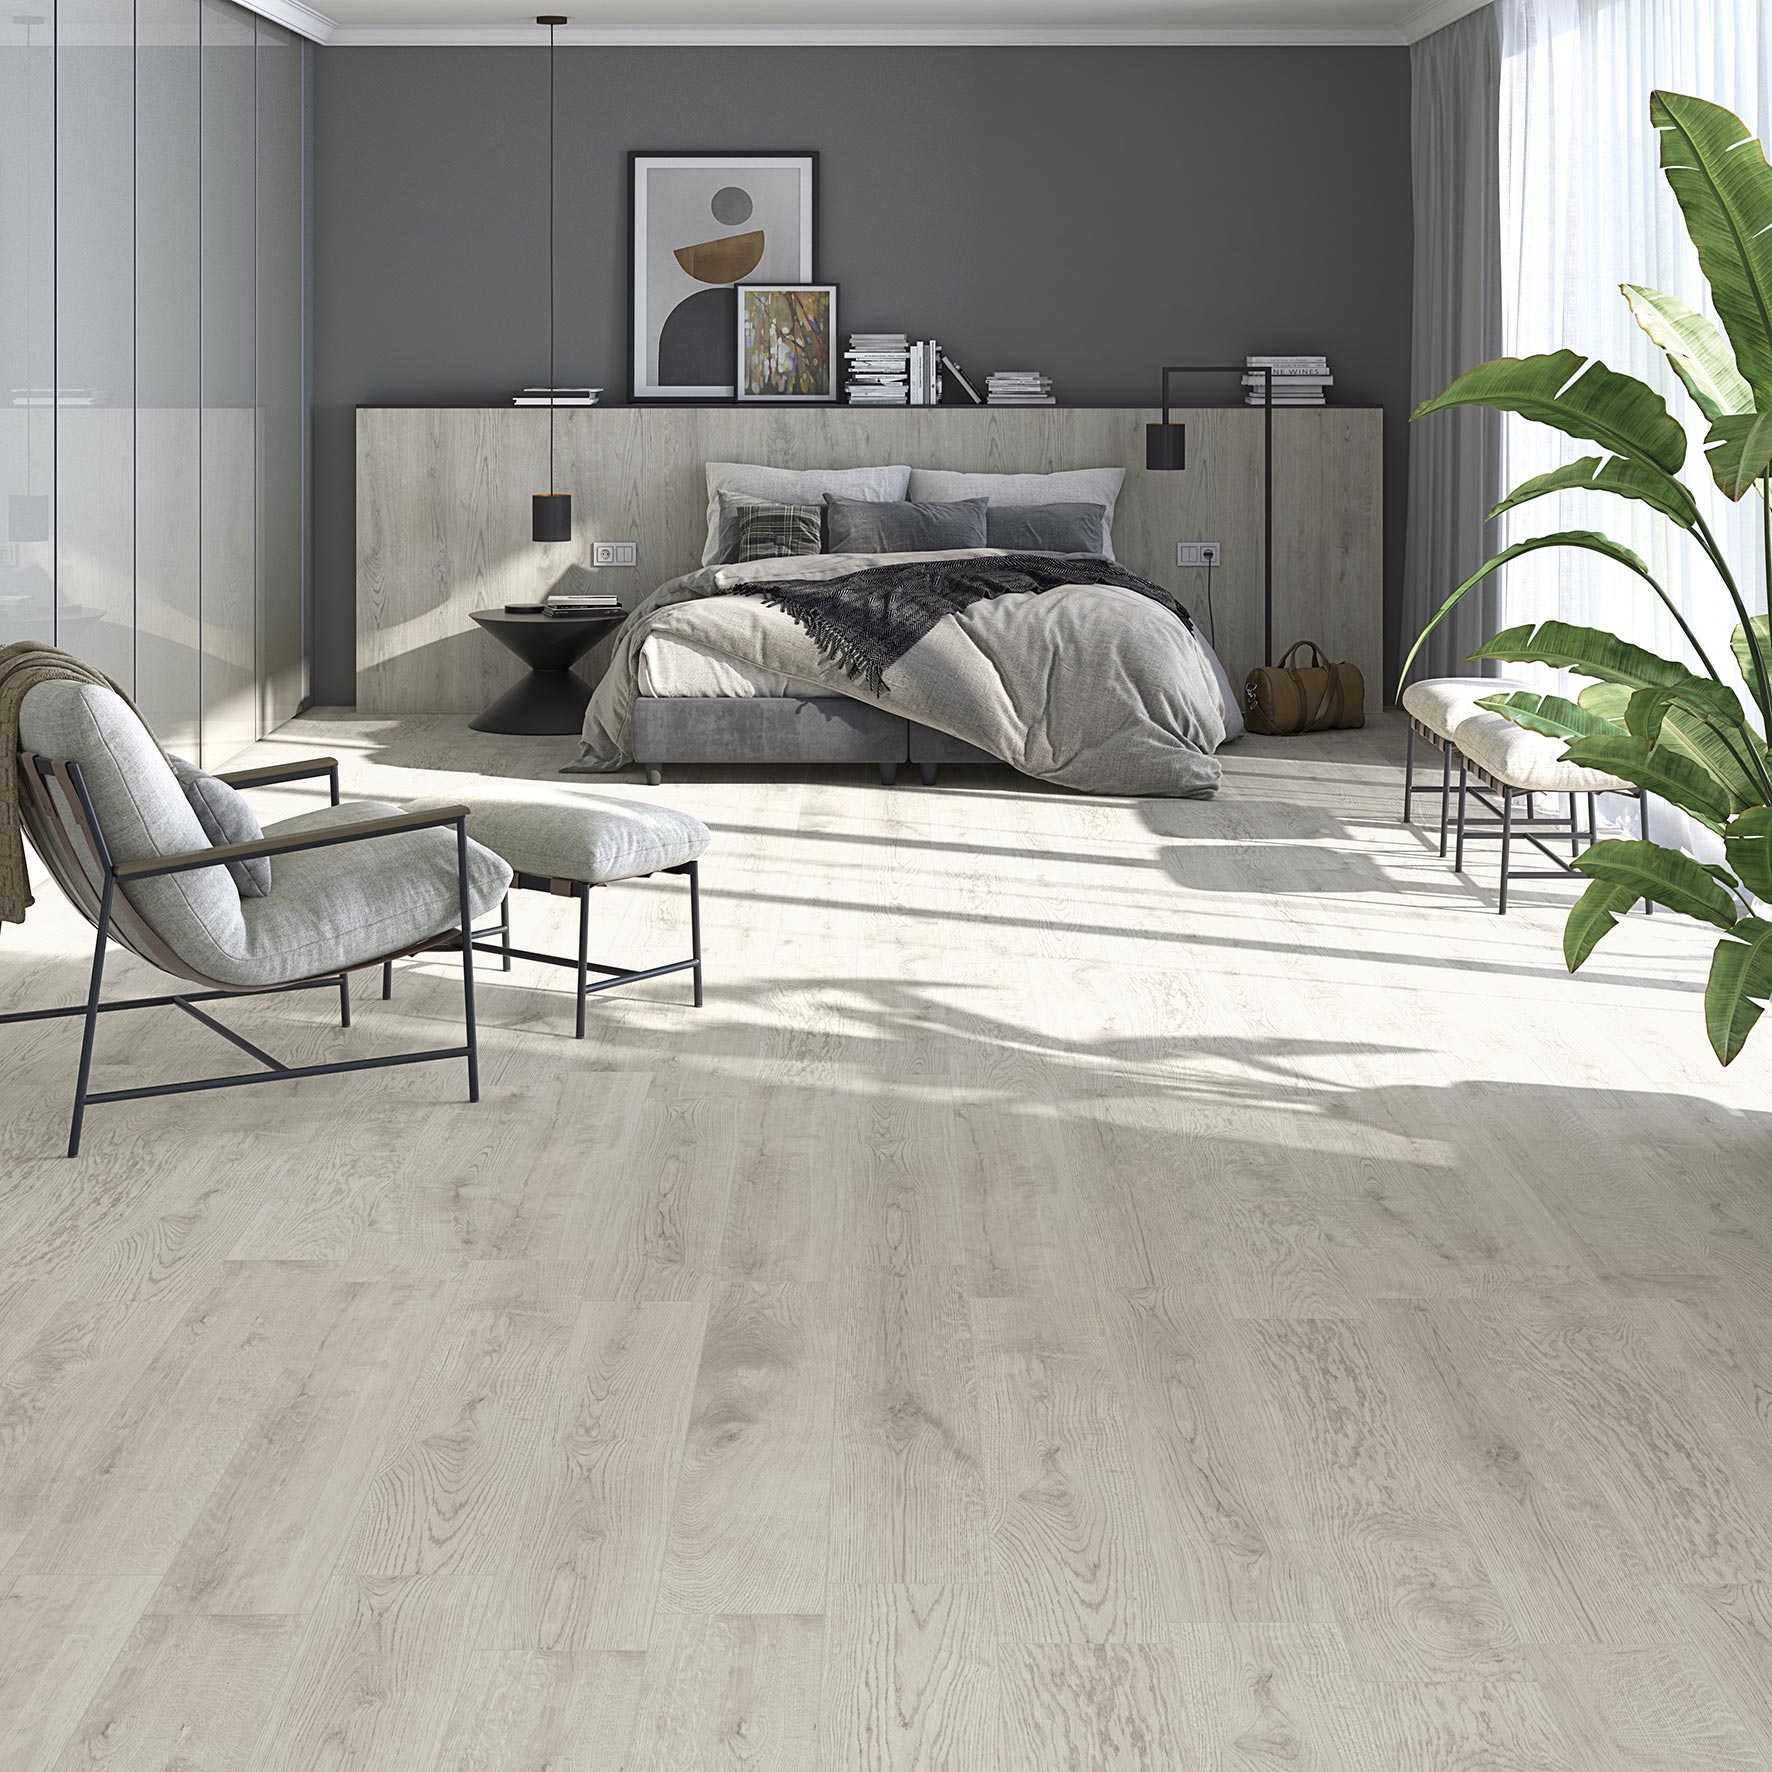 Extra Ordinary Ceramic Wood Collection, Porcelain Tile Wood